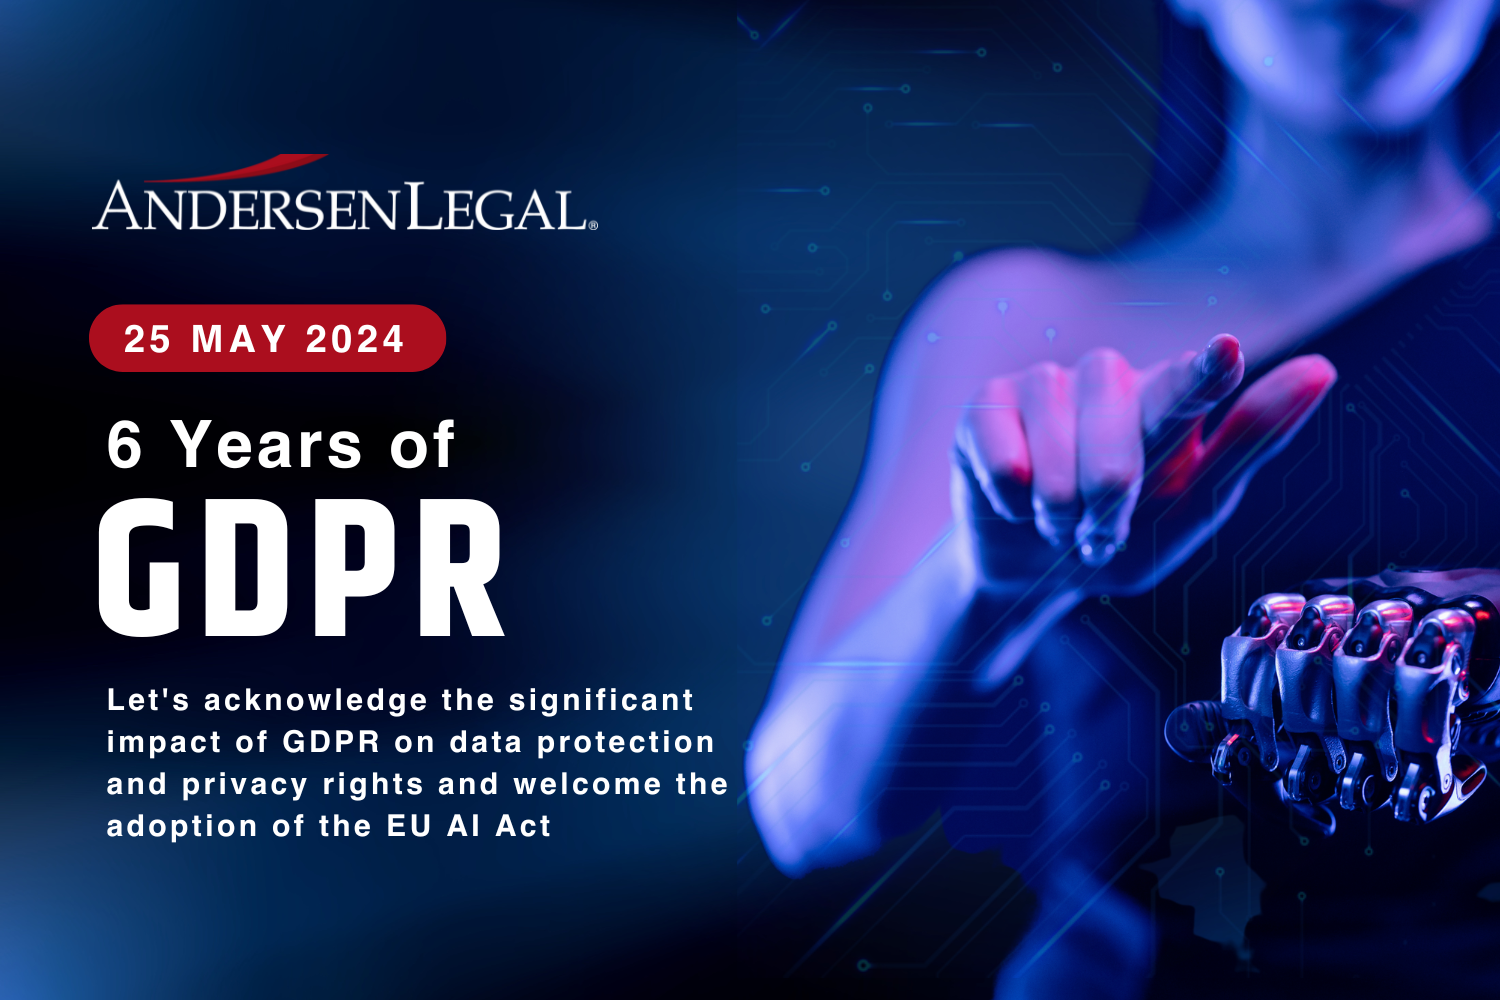 GDPR: 25th of May, 2024 – We celebrate the 6th anniversary